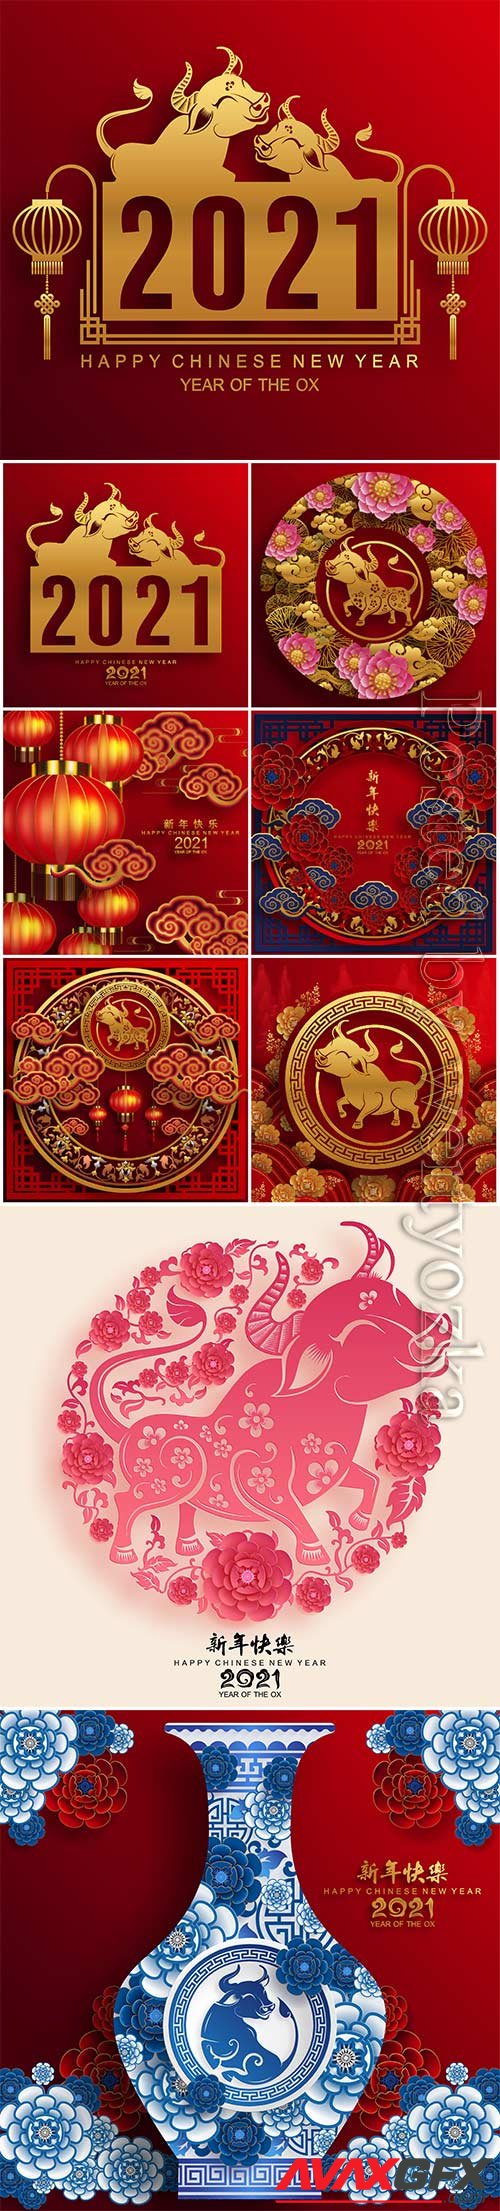 Chinese new year 2021 greeting vector poster